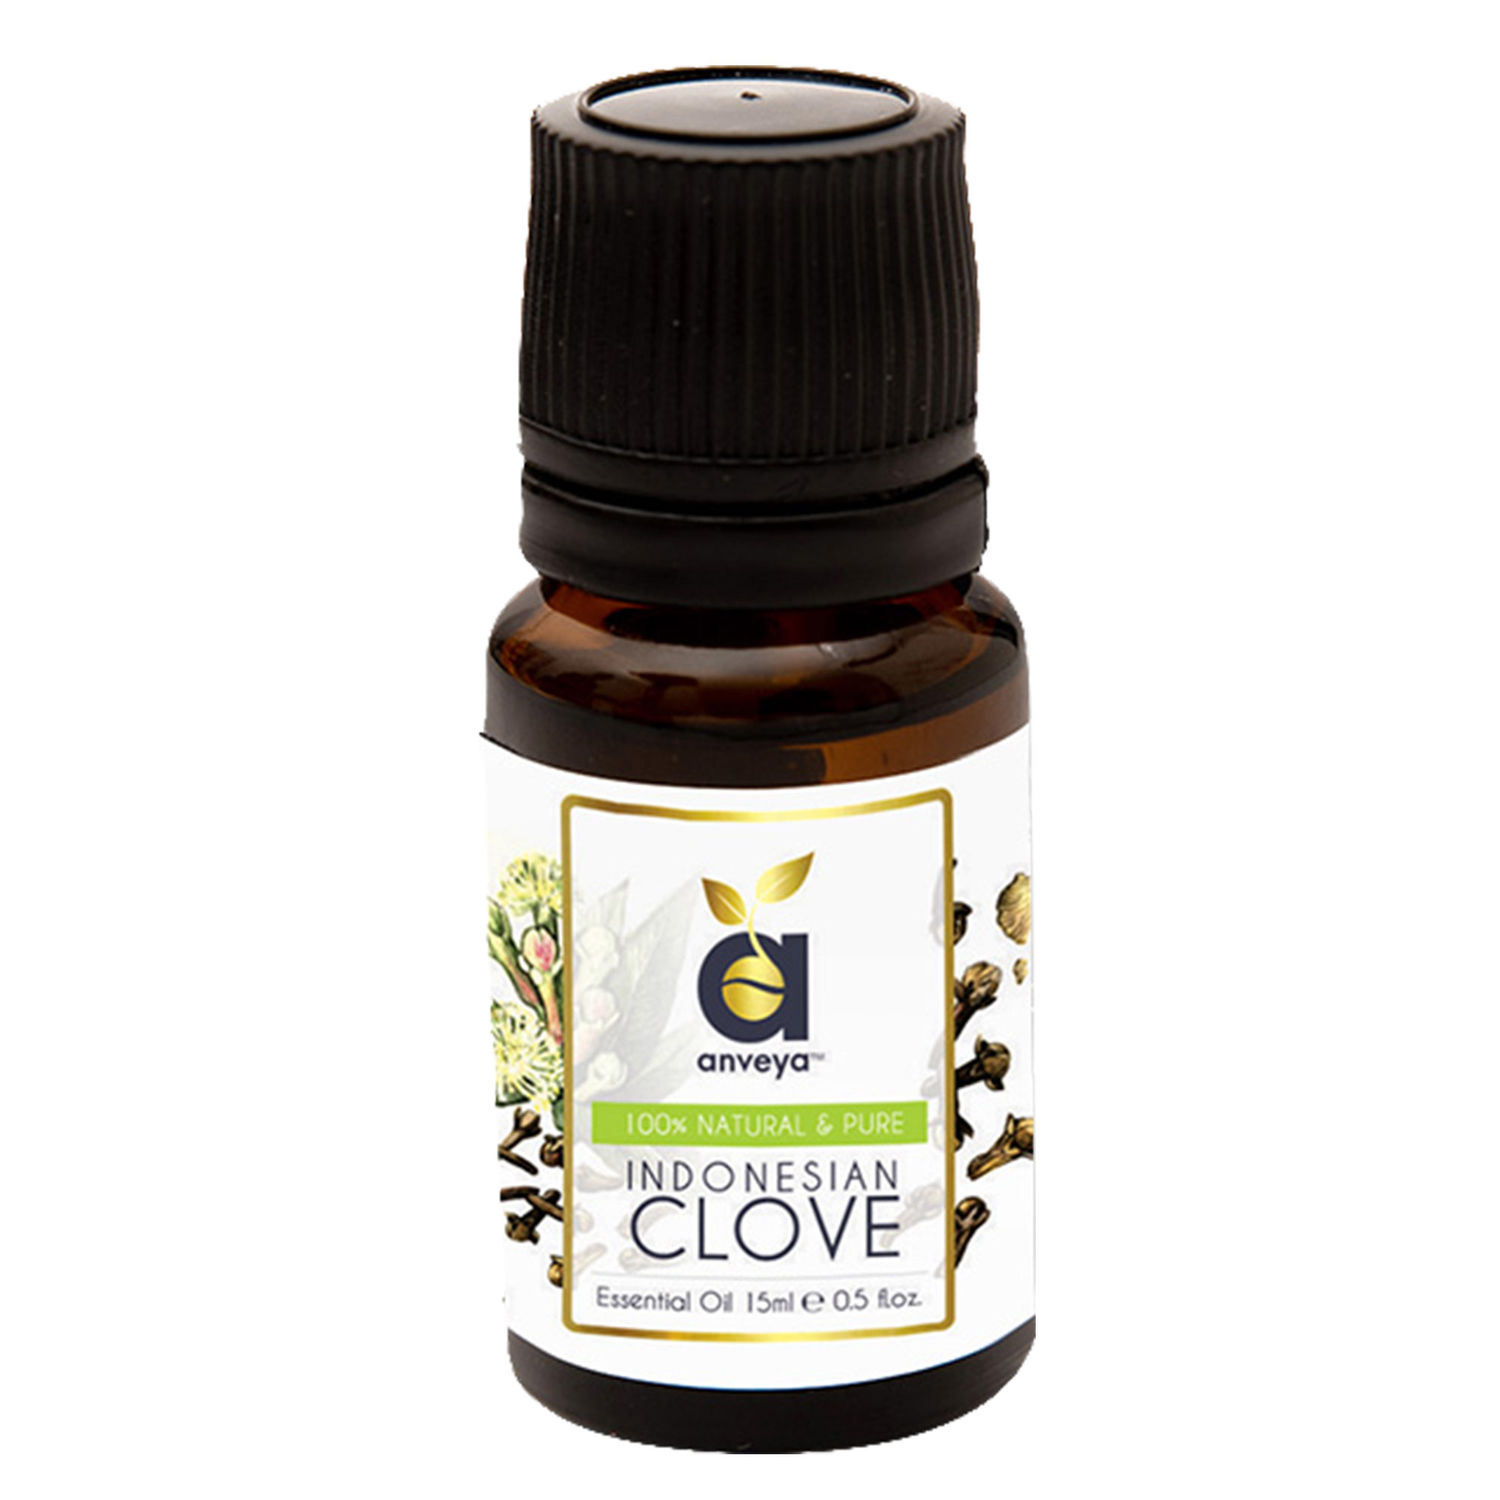 Buy Anveya Clove Essential Oil, 100% Natural & Pure, 15ml, For Hair, Acne, Toothache, Steam & Diffuser - Purplle